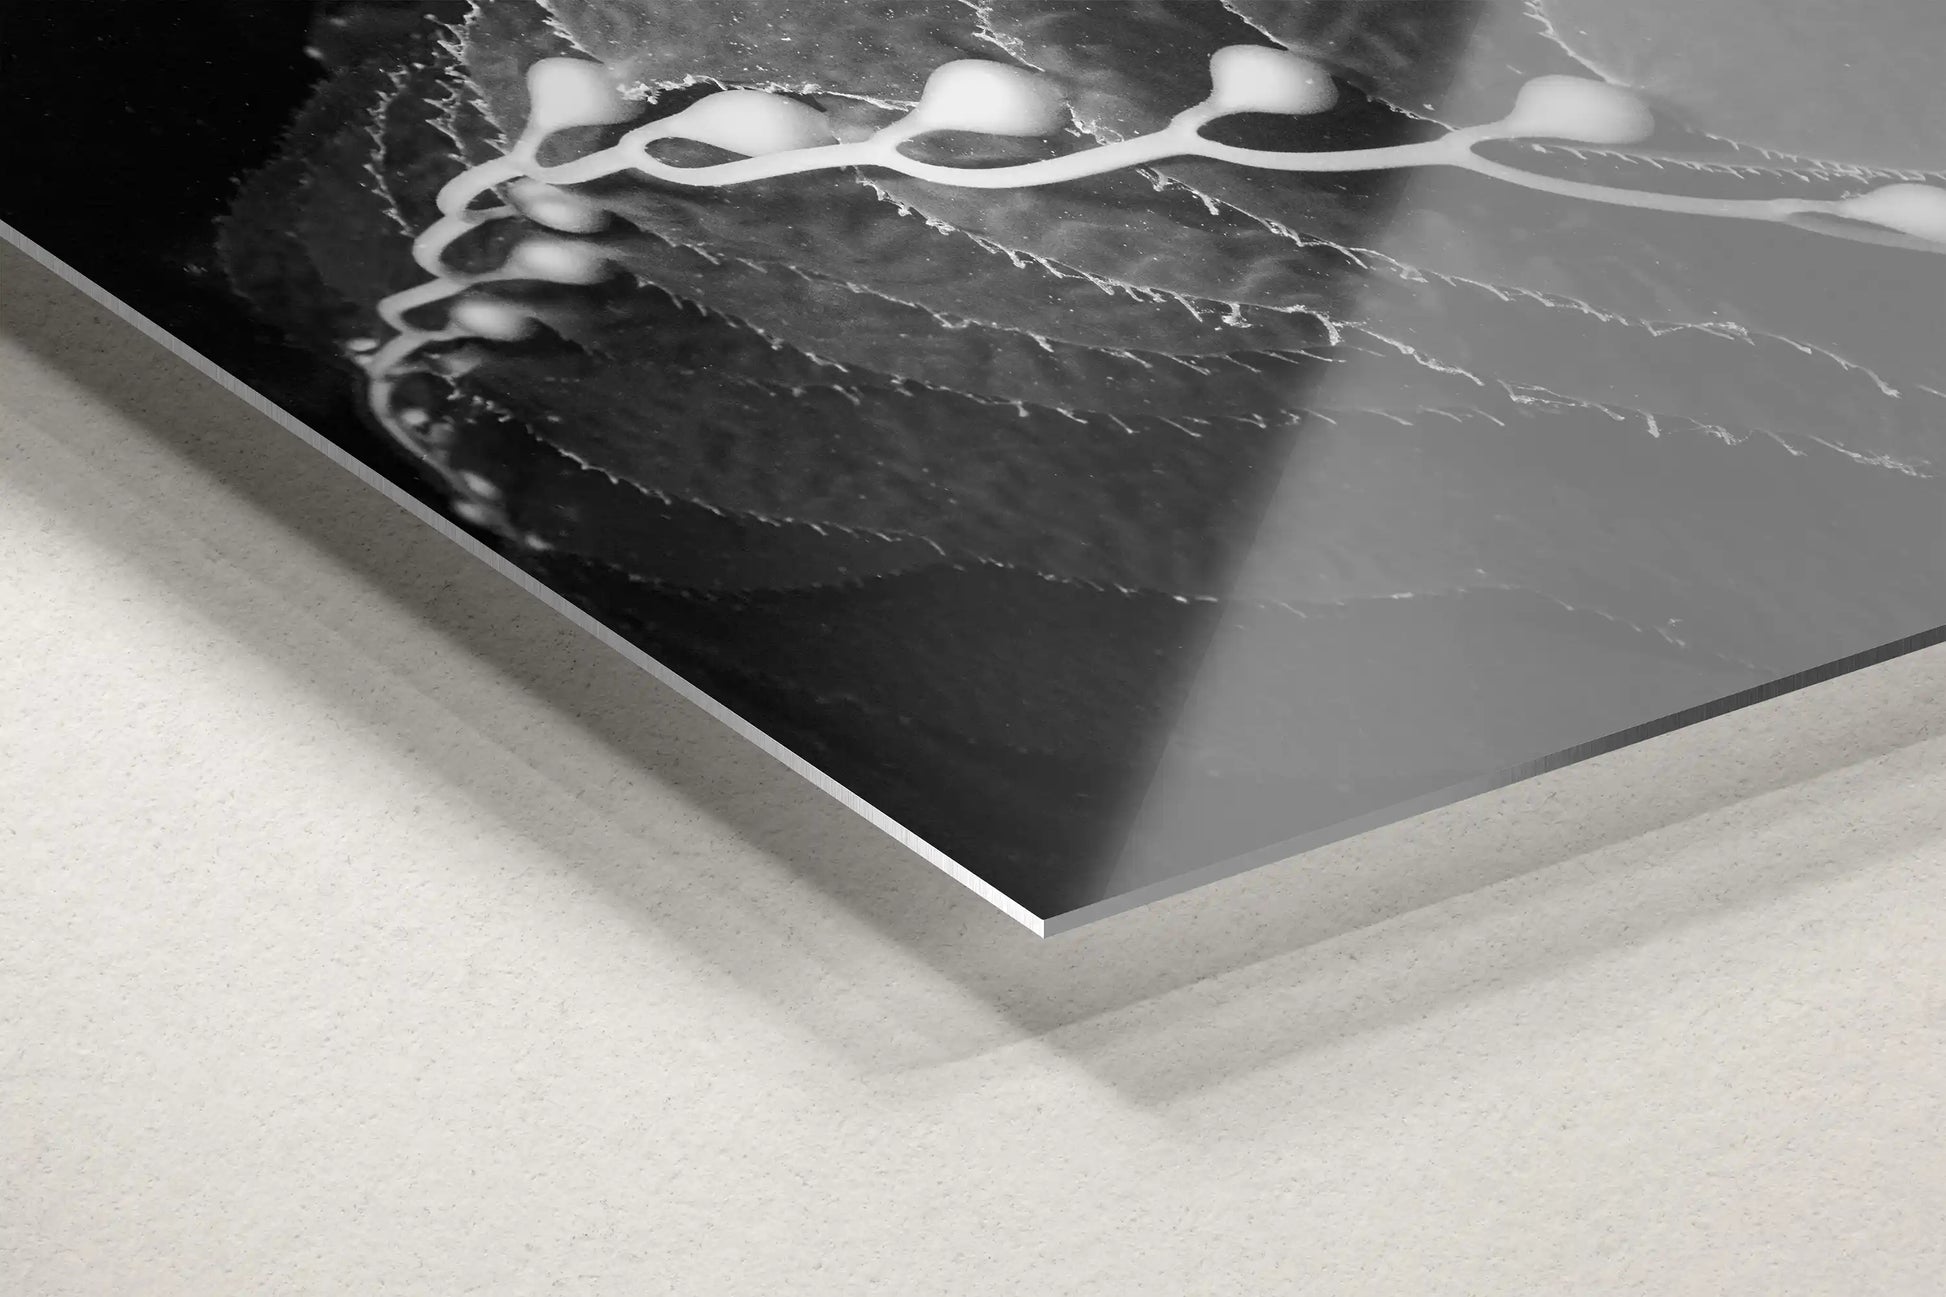 Detail of a sleek metal print's edge with a monochrome California Giant Kelp image, merging modern style with oceanic themes.